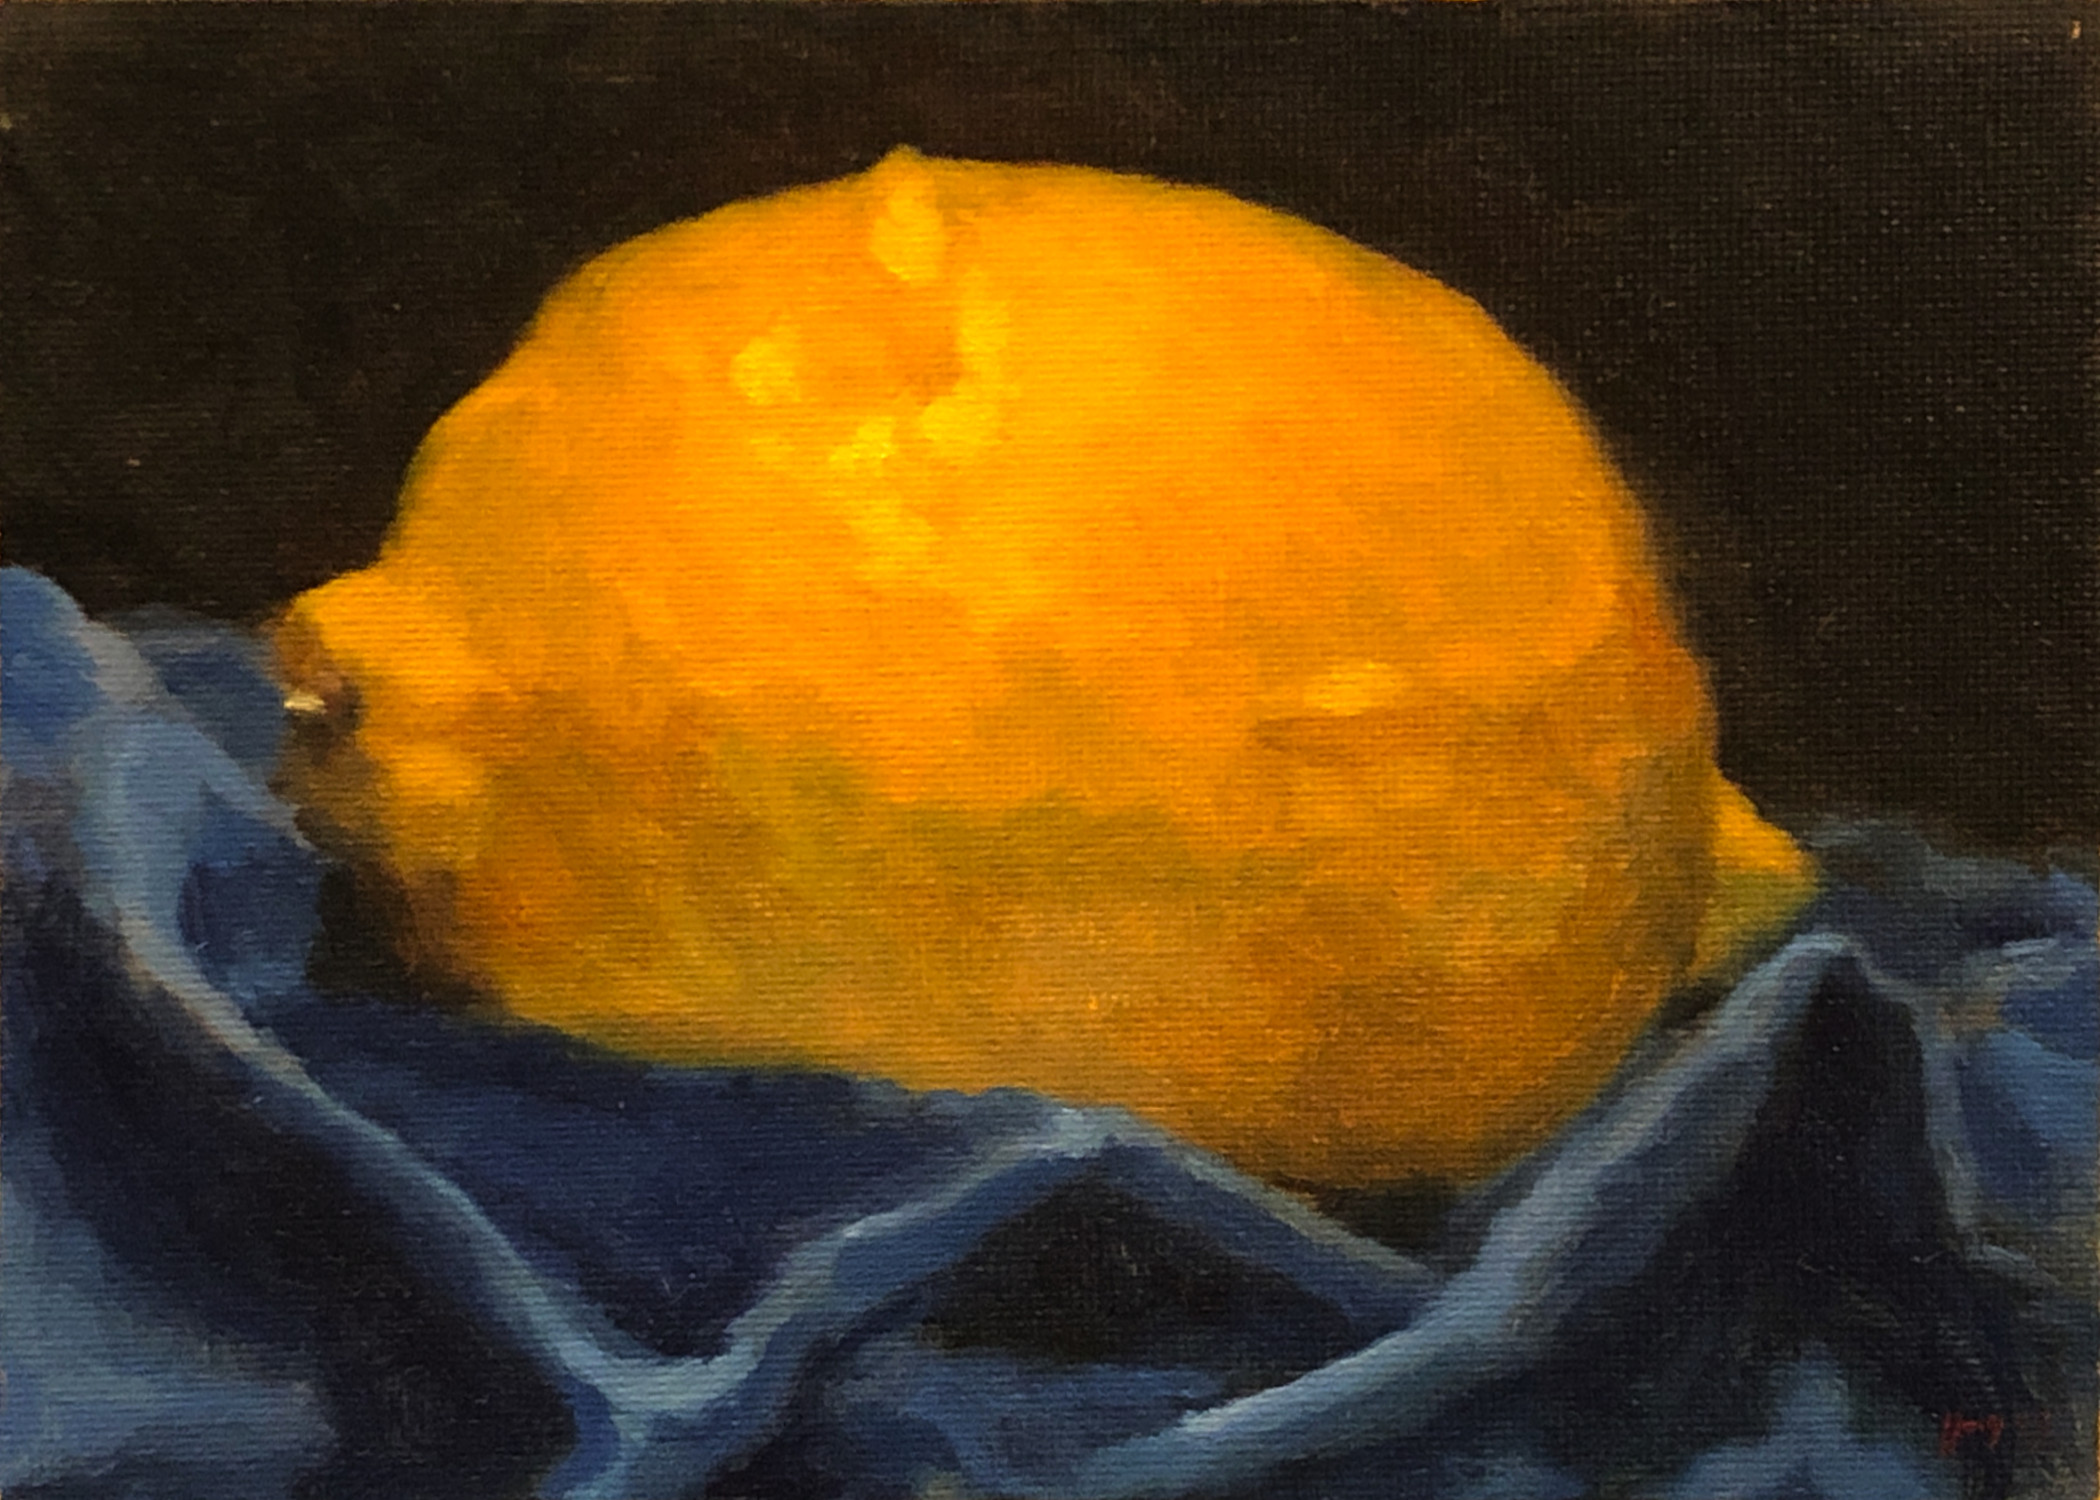 "Lemon and Blue Velvet"
View this painting